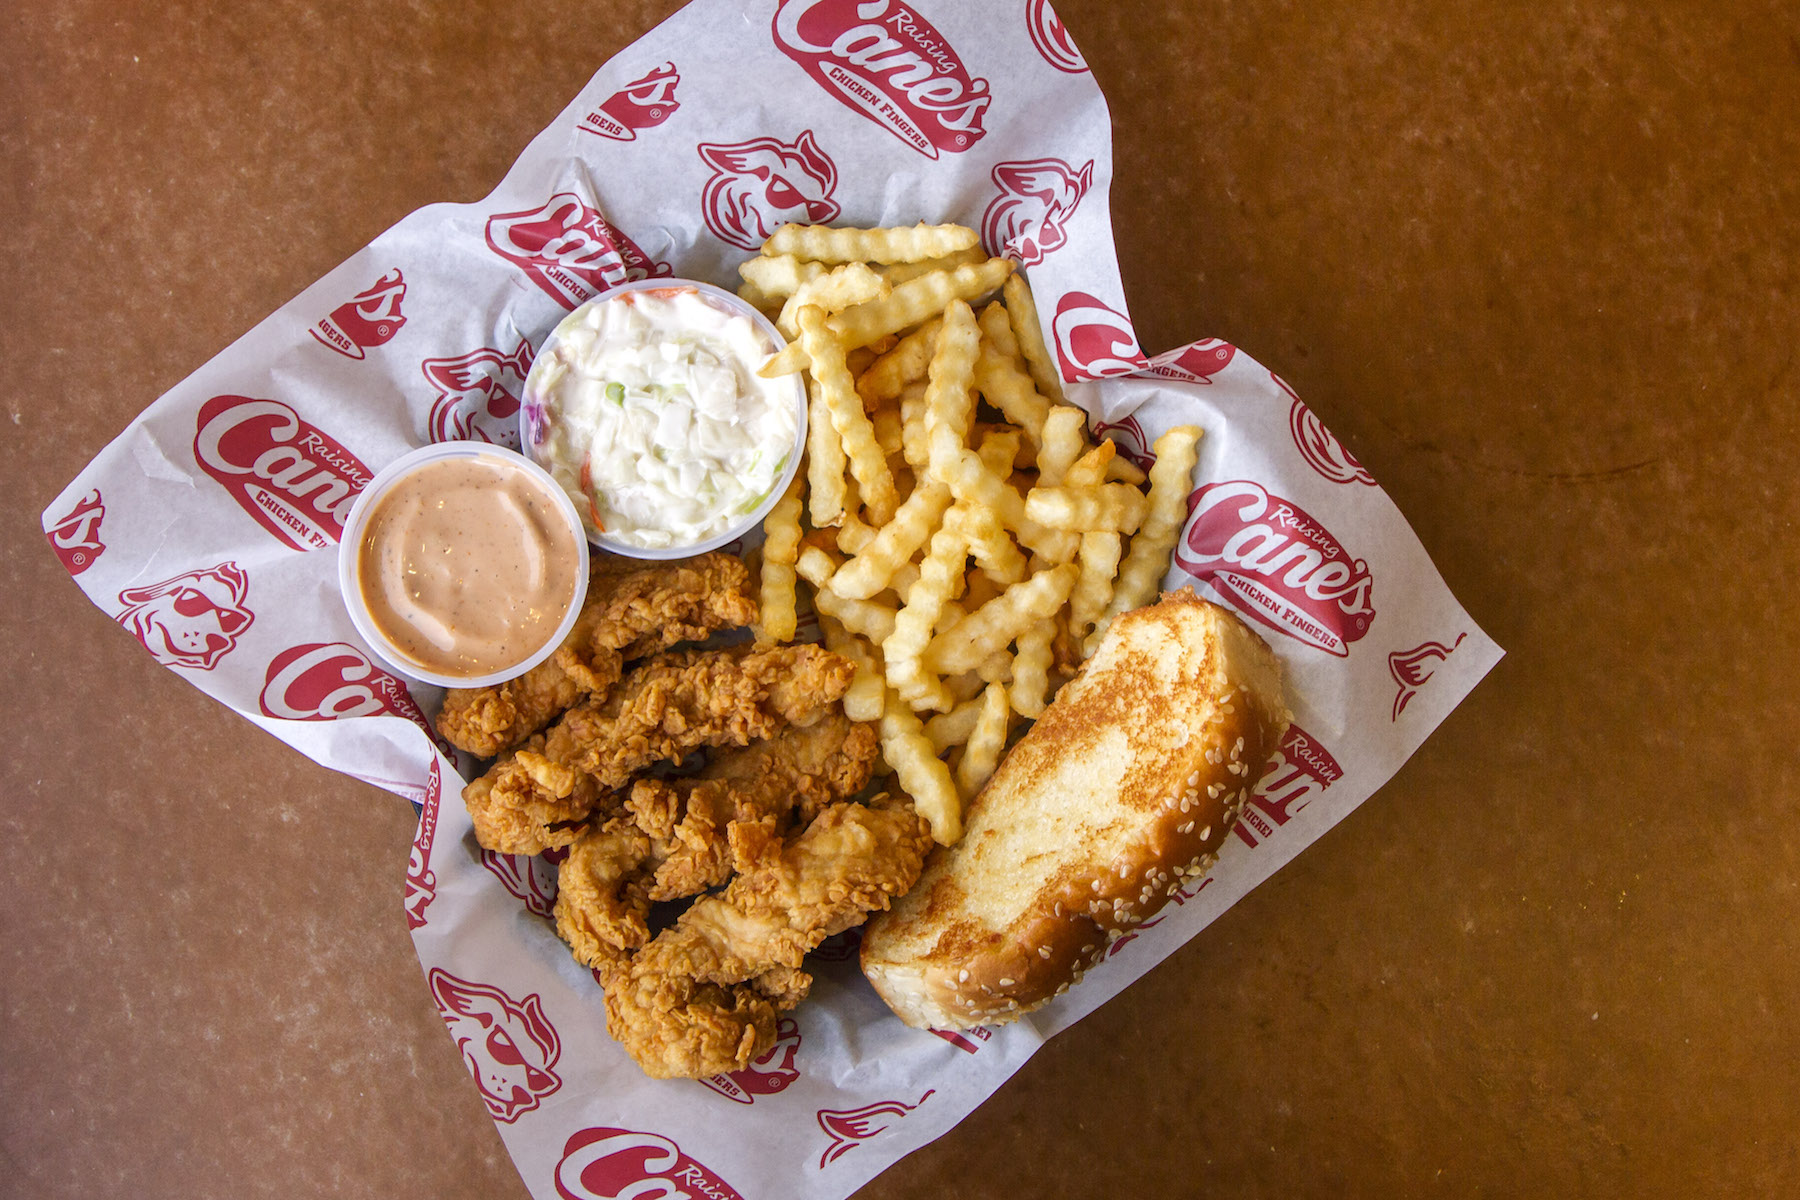 Raising Cane’s launches incentive program to recruit ‘best of the best